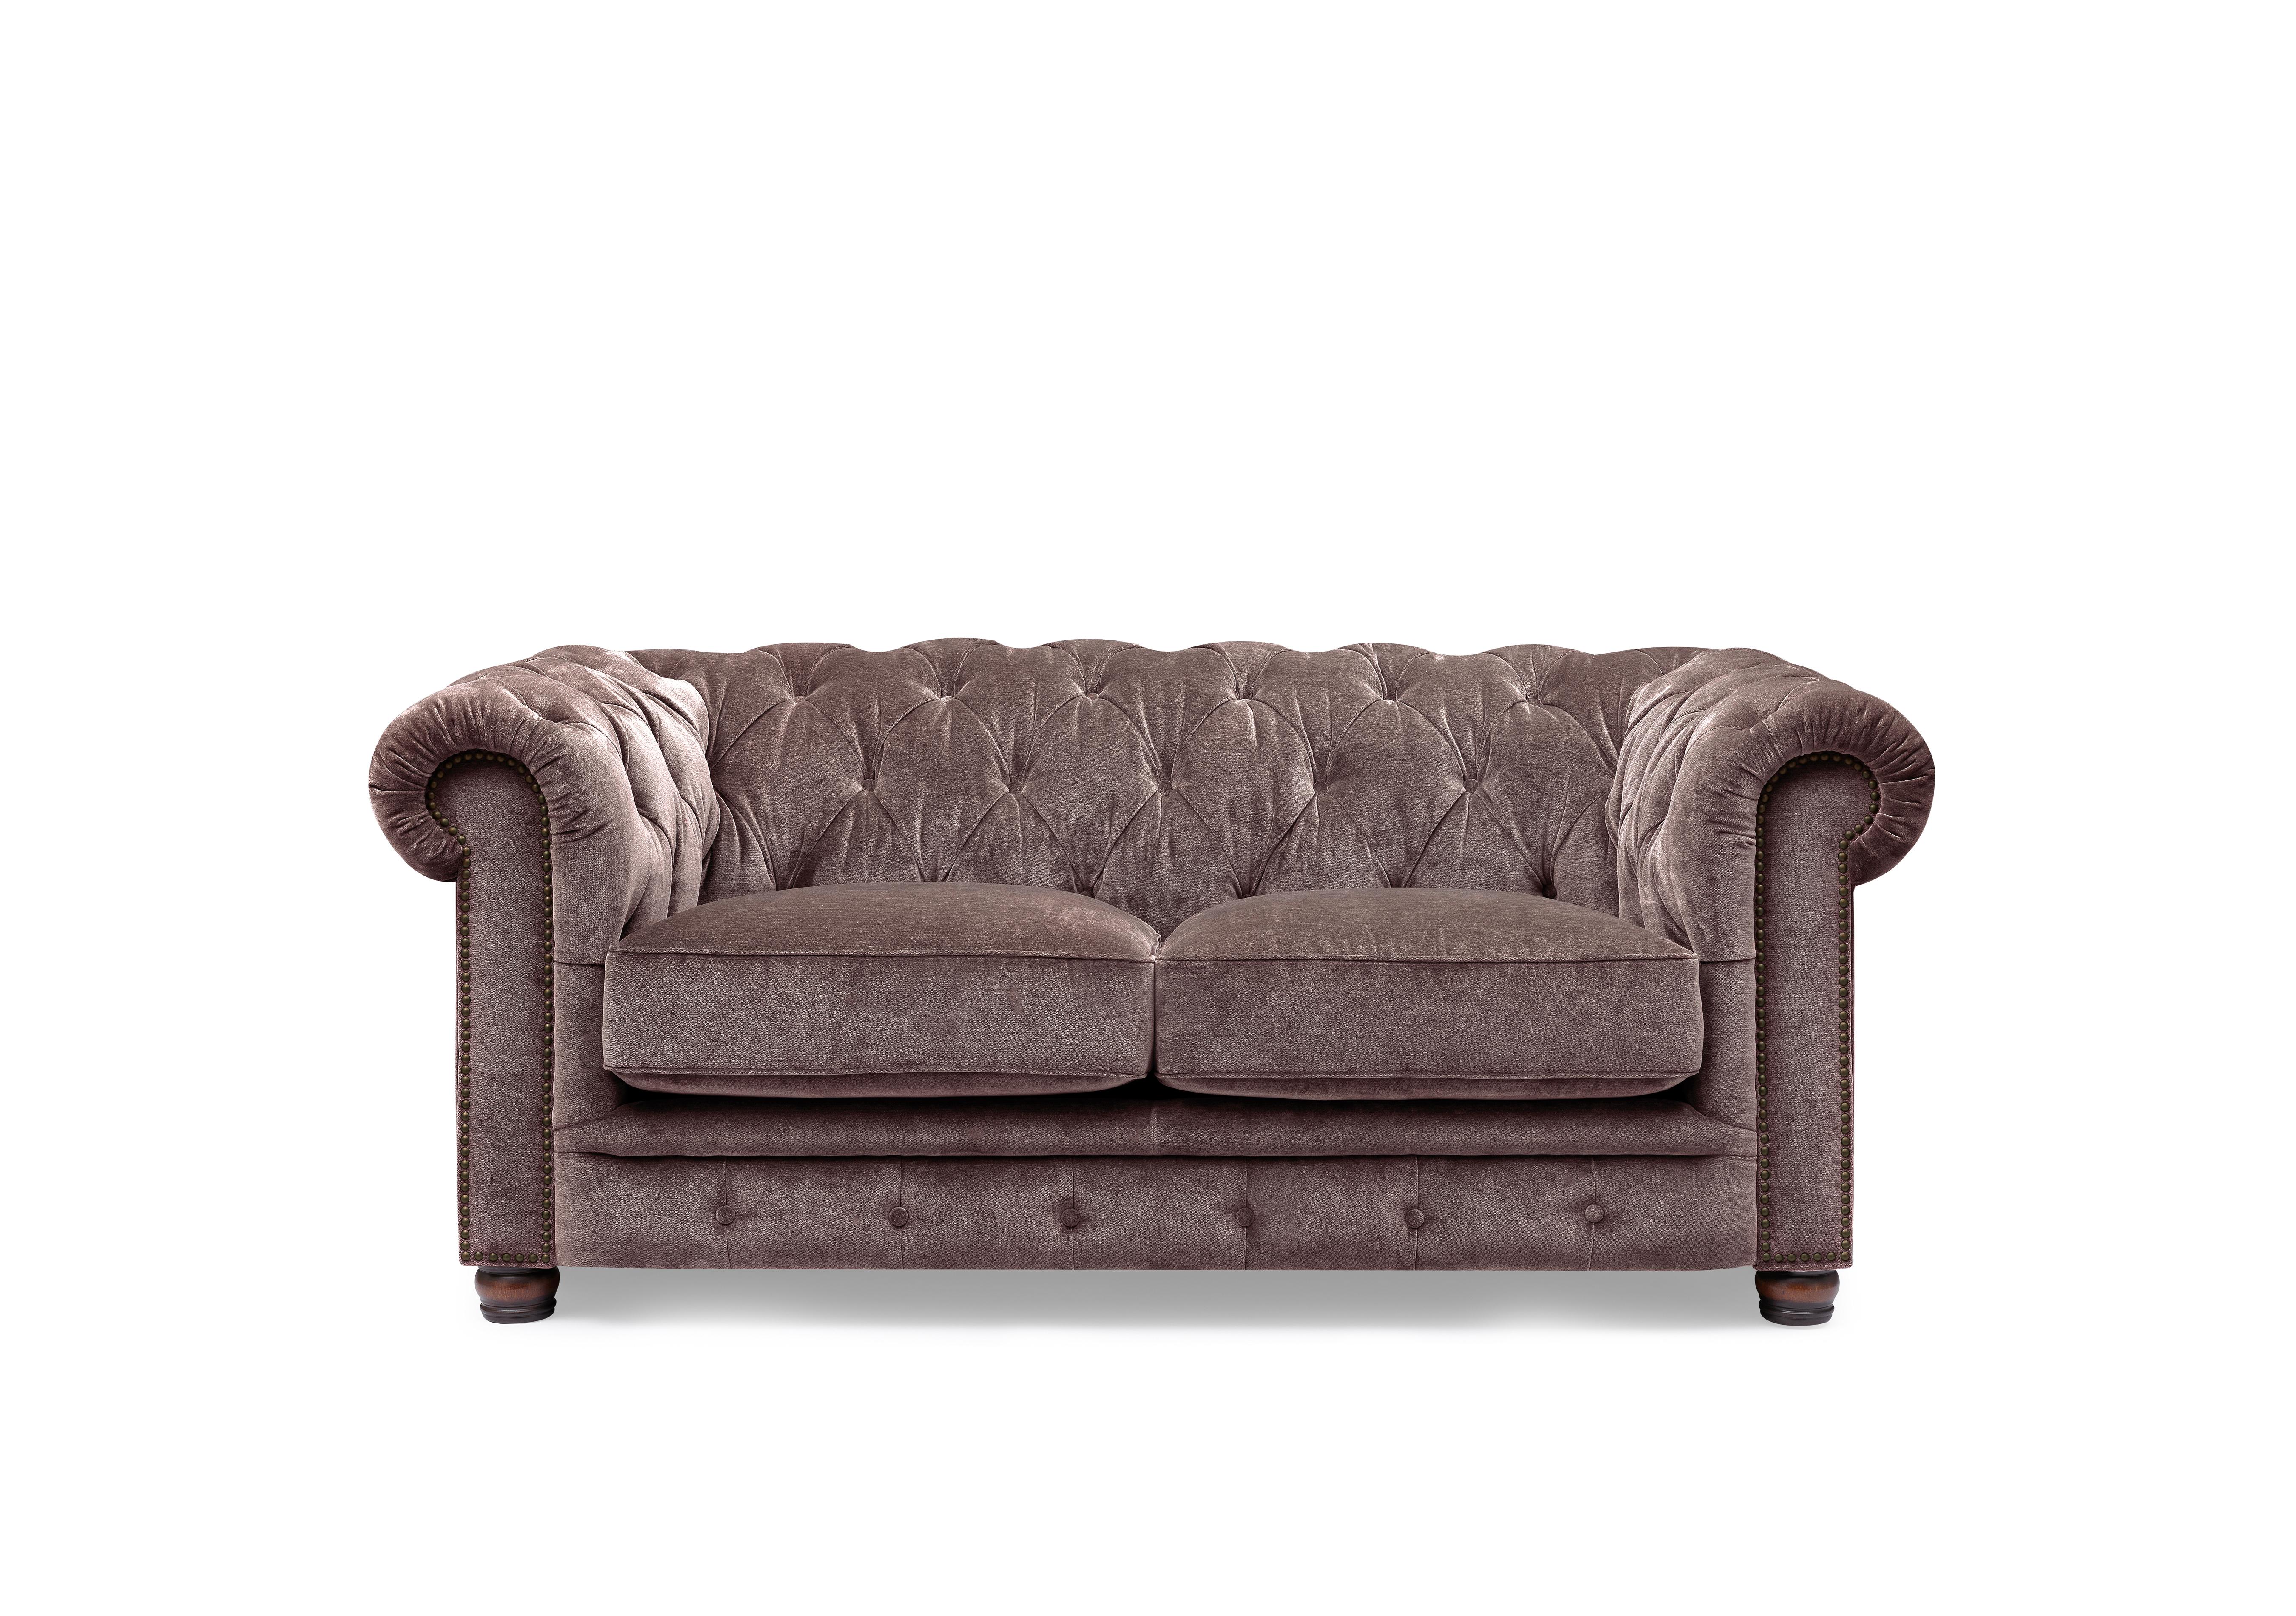 Shackleton 2 Seater Fabric Chesterfield Sofa with USB-C in X3y1-W023 Antler on Furniture Village